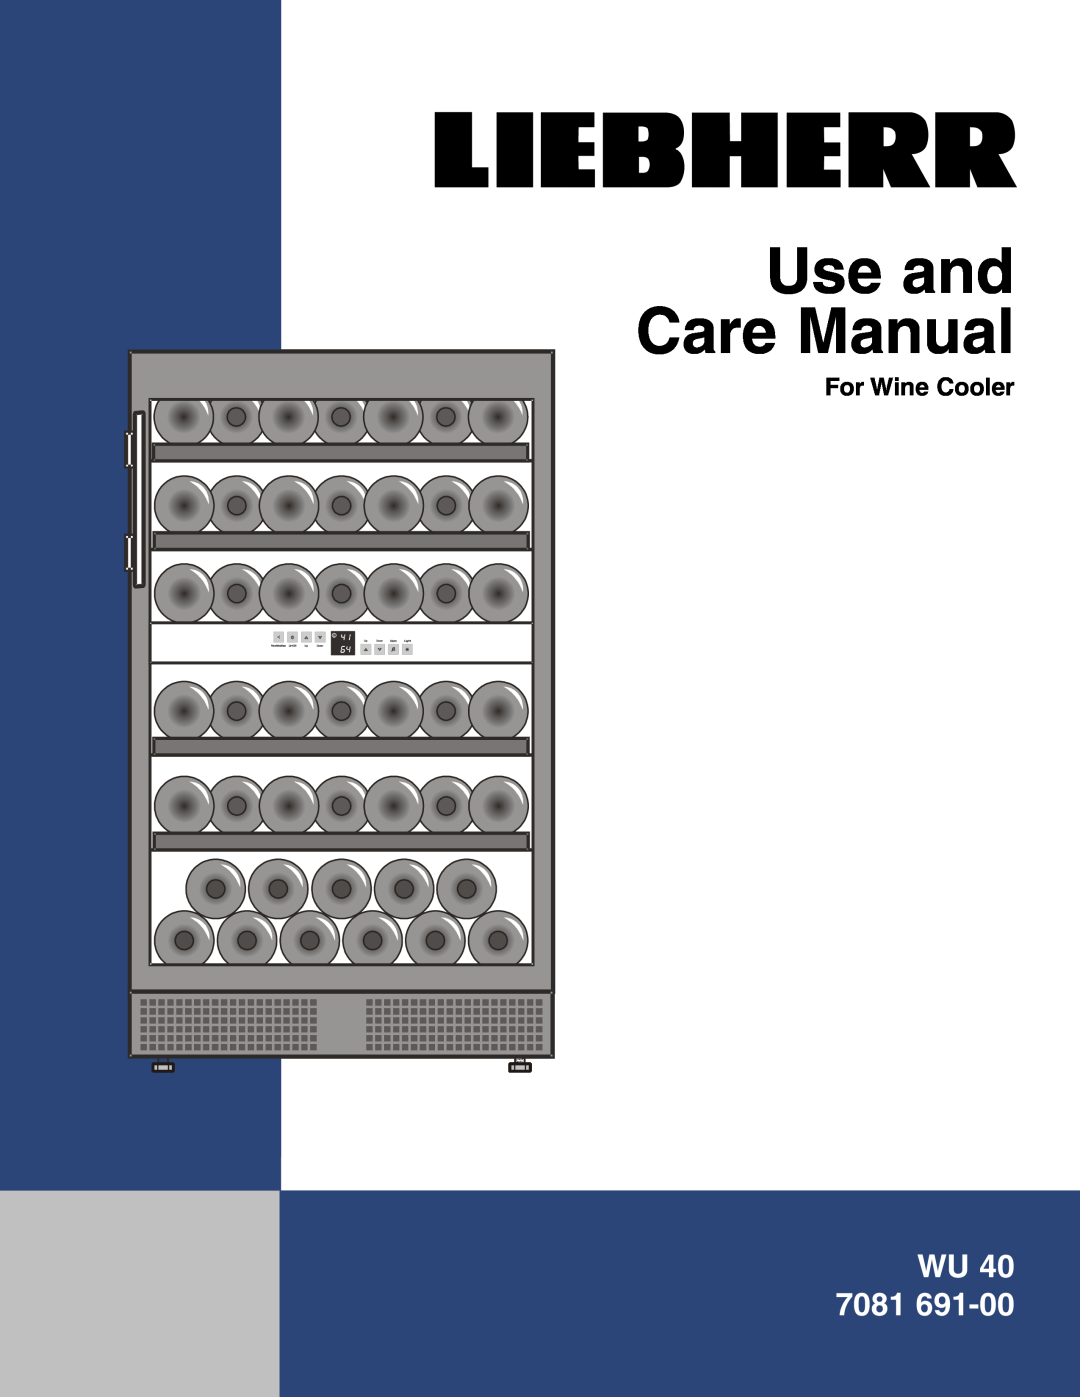 Liebherr WU 40 manual For Wine Cooler, Use and Care Manual, Wu 